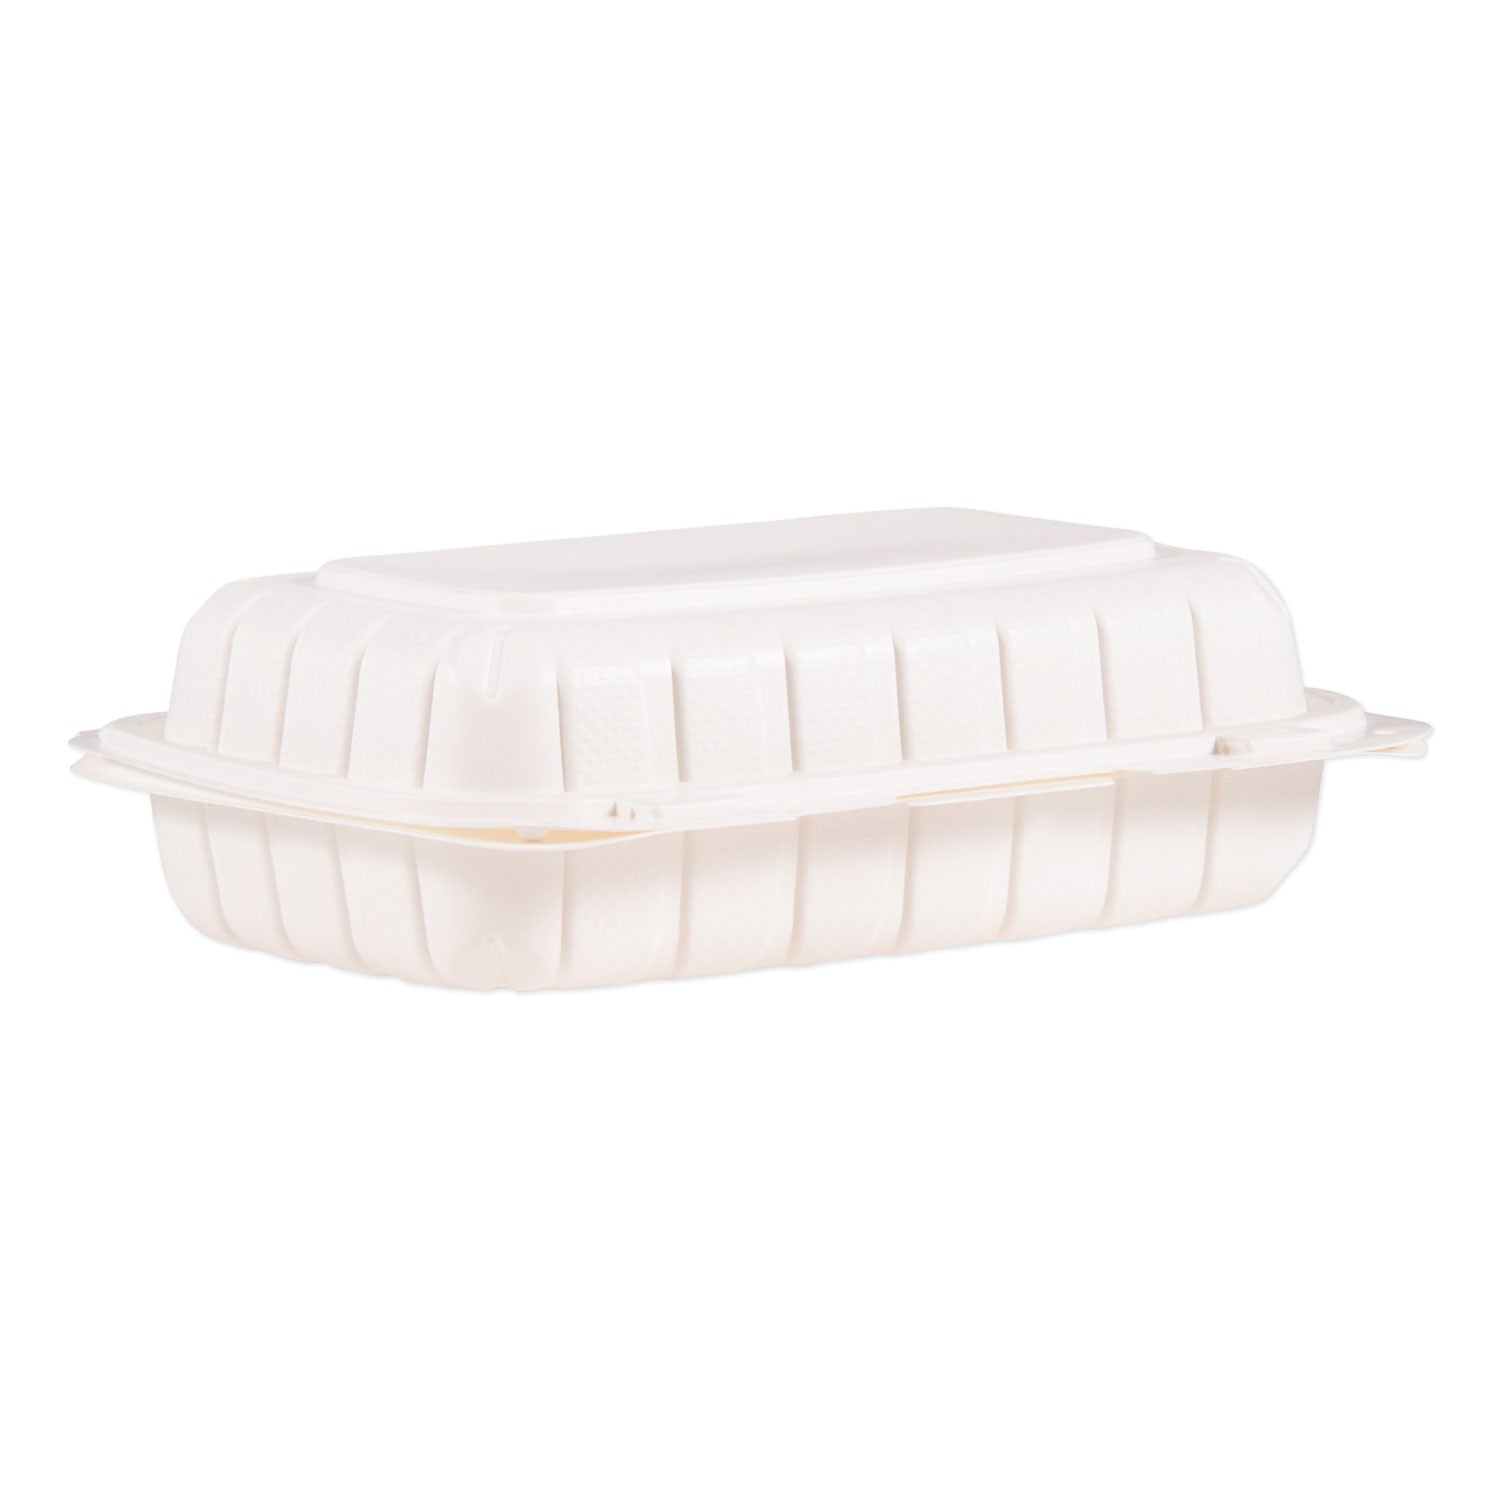 hinged-lid-containers-hoagie-container-65-x-9-x-28-white-plastic-200-carton_dcc206mfppht1 - 2